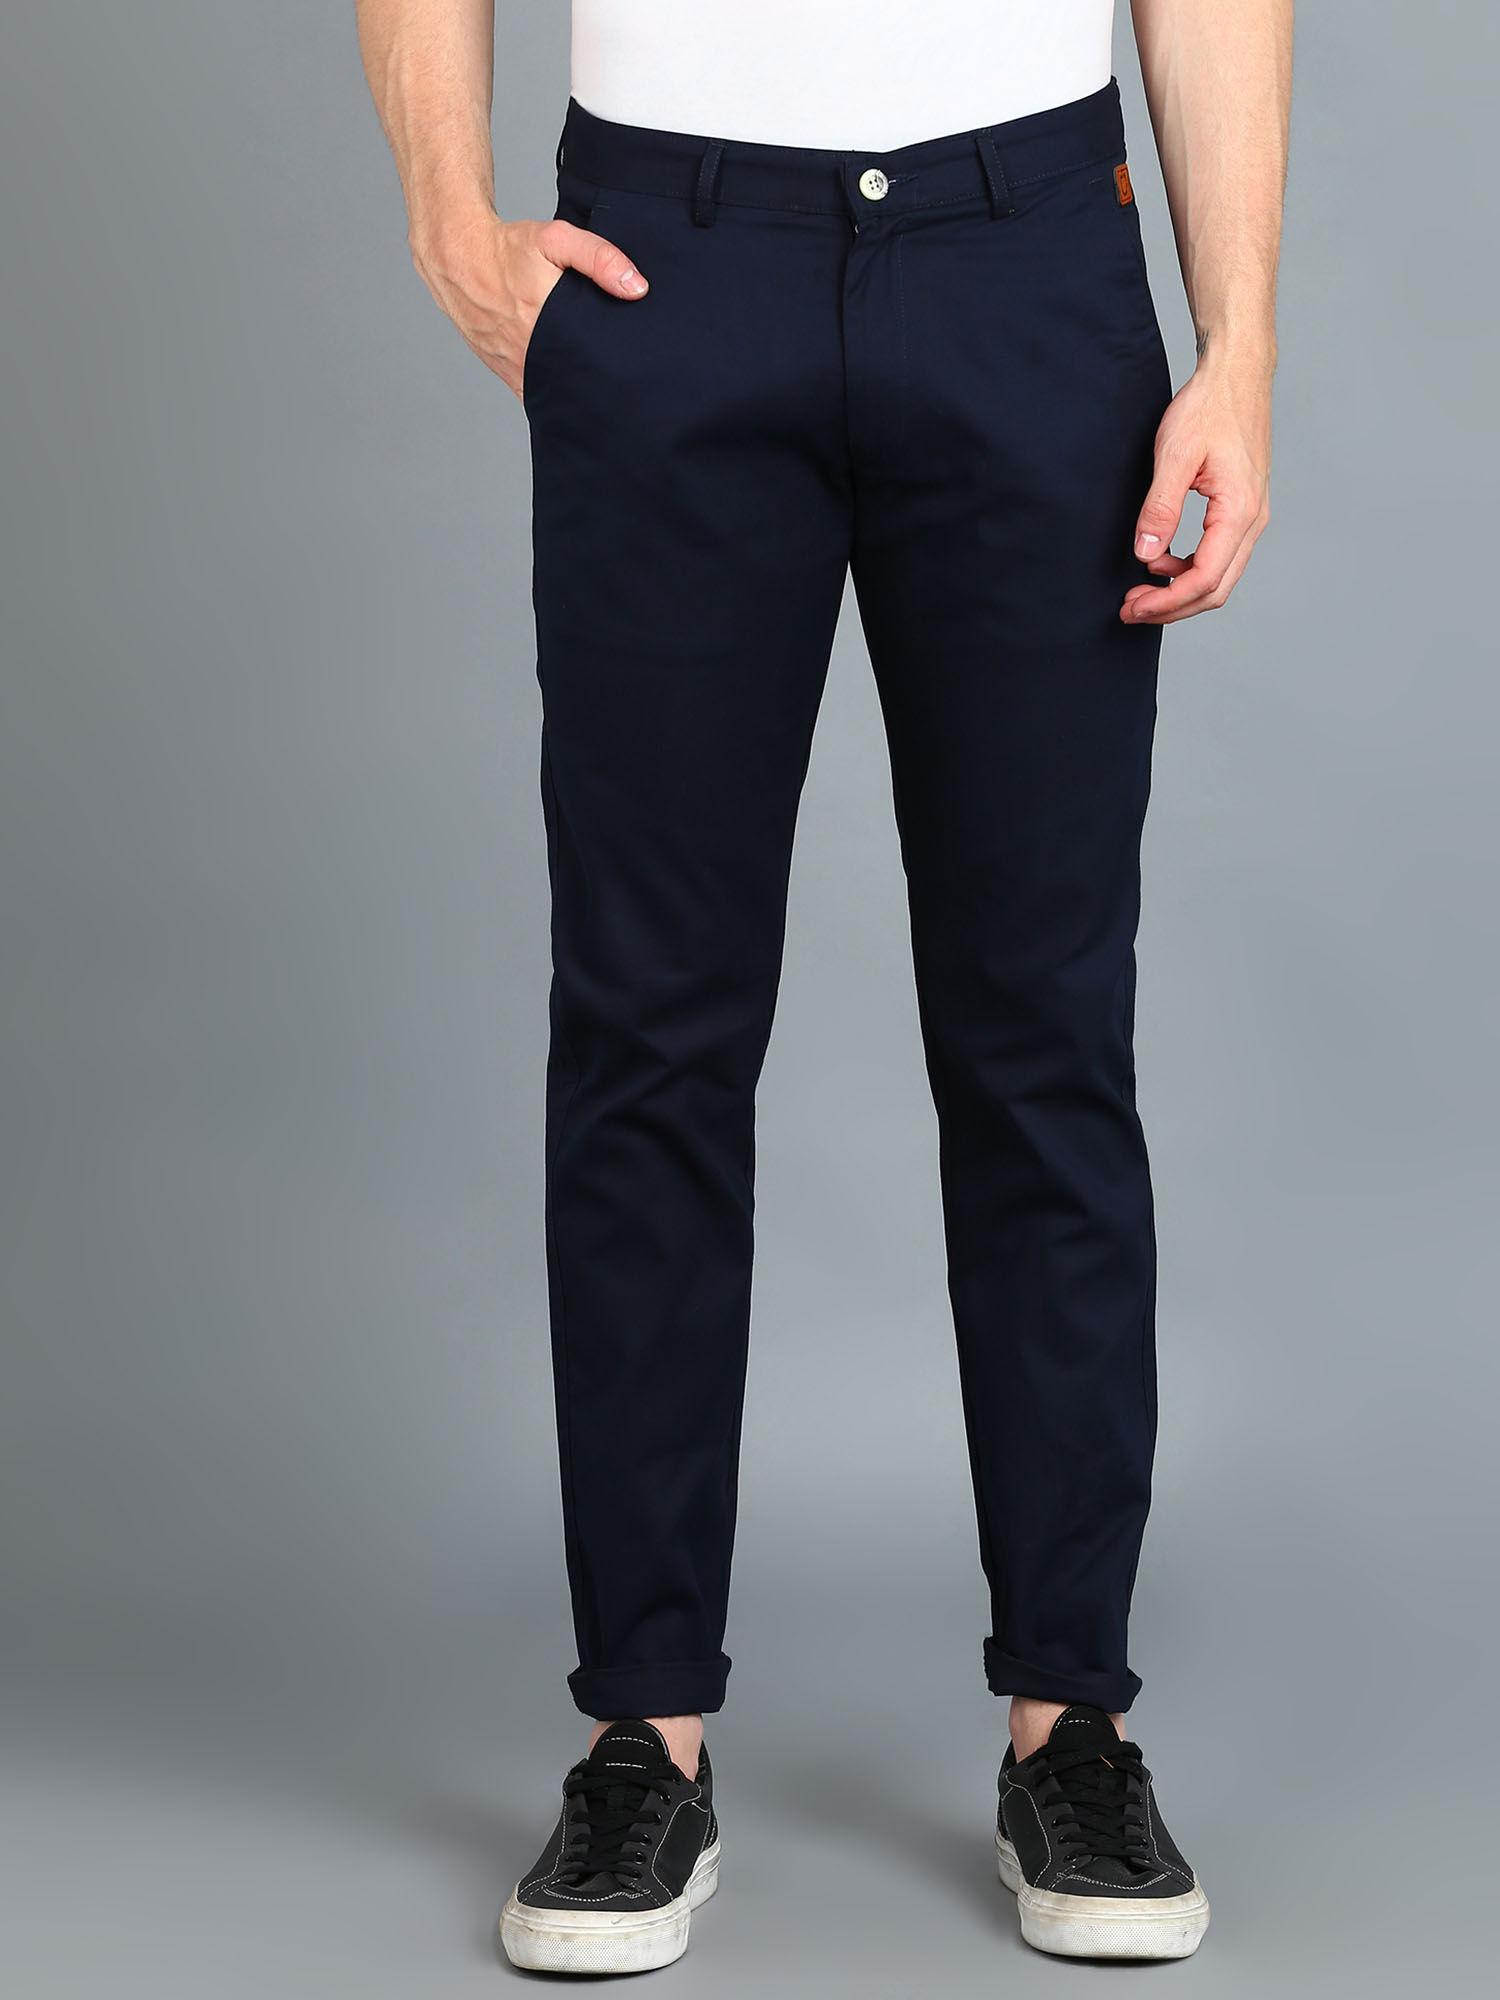 Men Navy Blue Cotton Slim Fit Casual Chinos Trousers